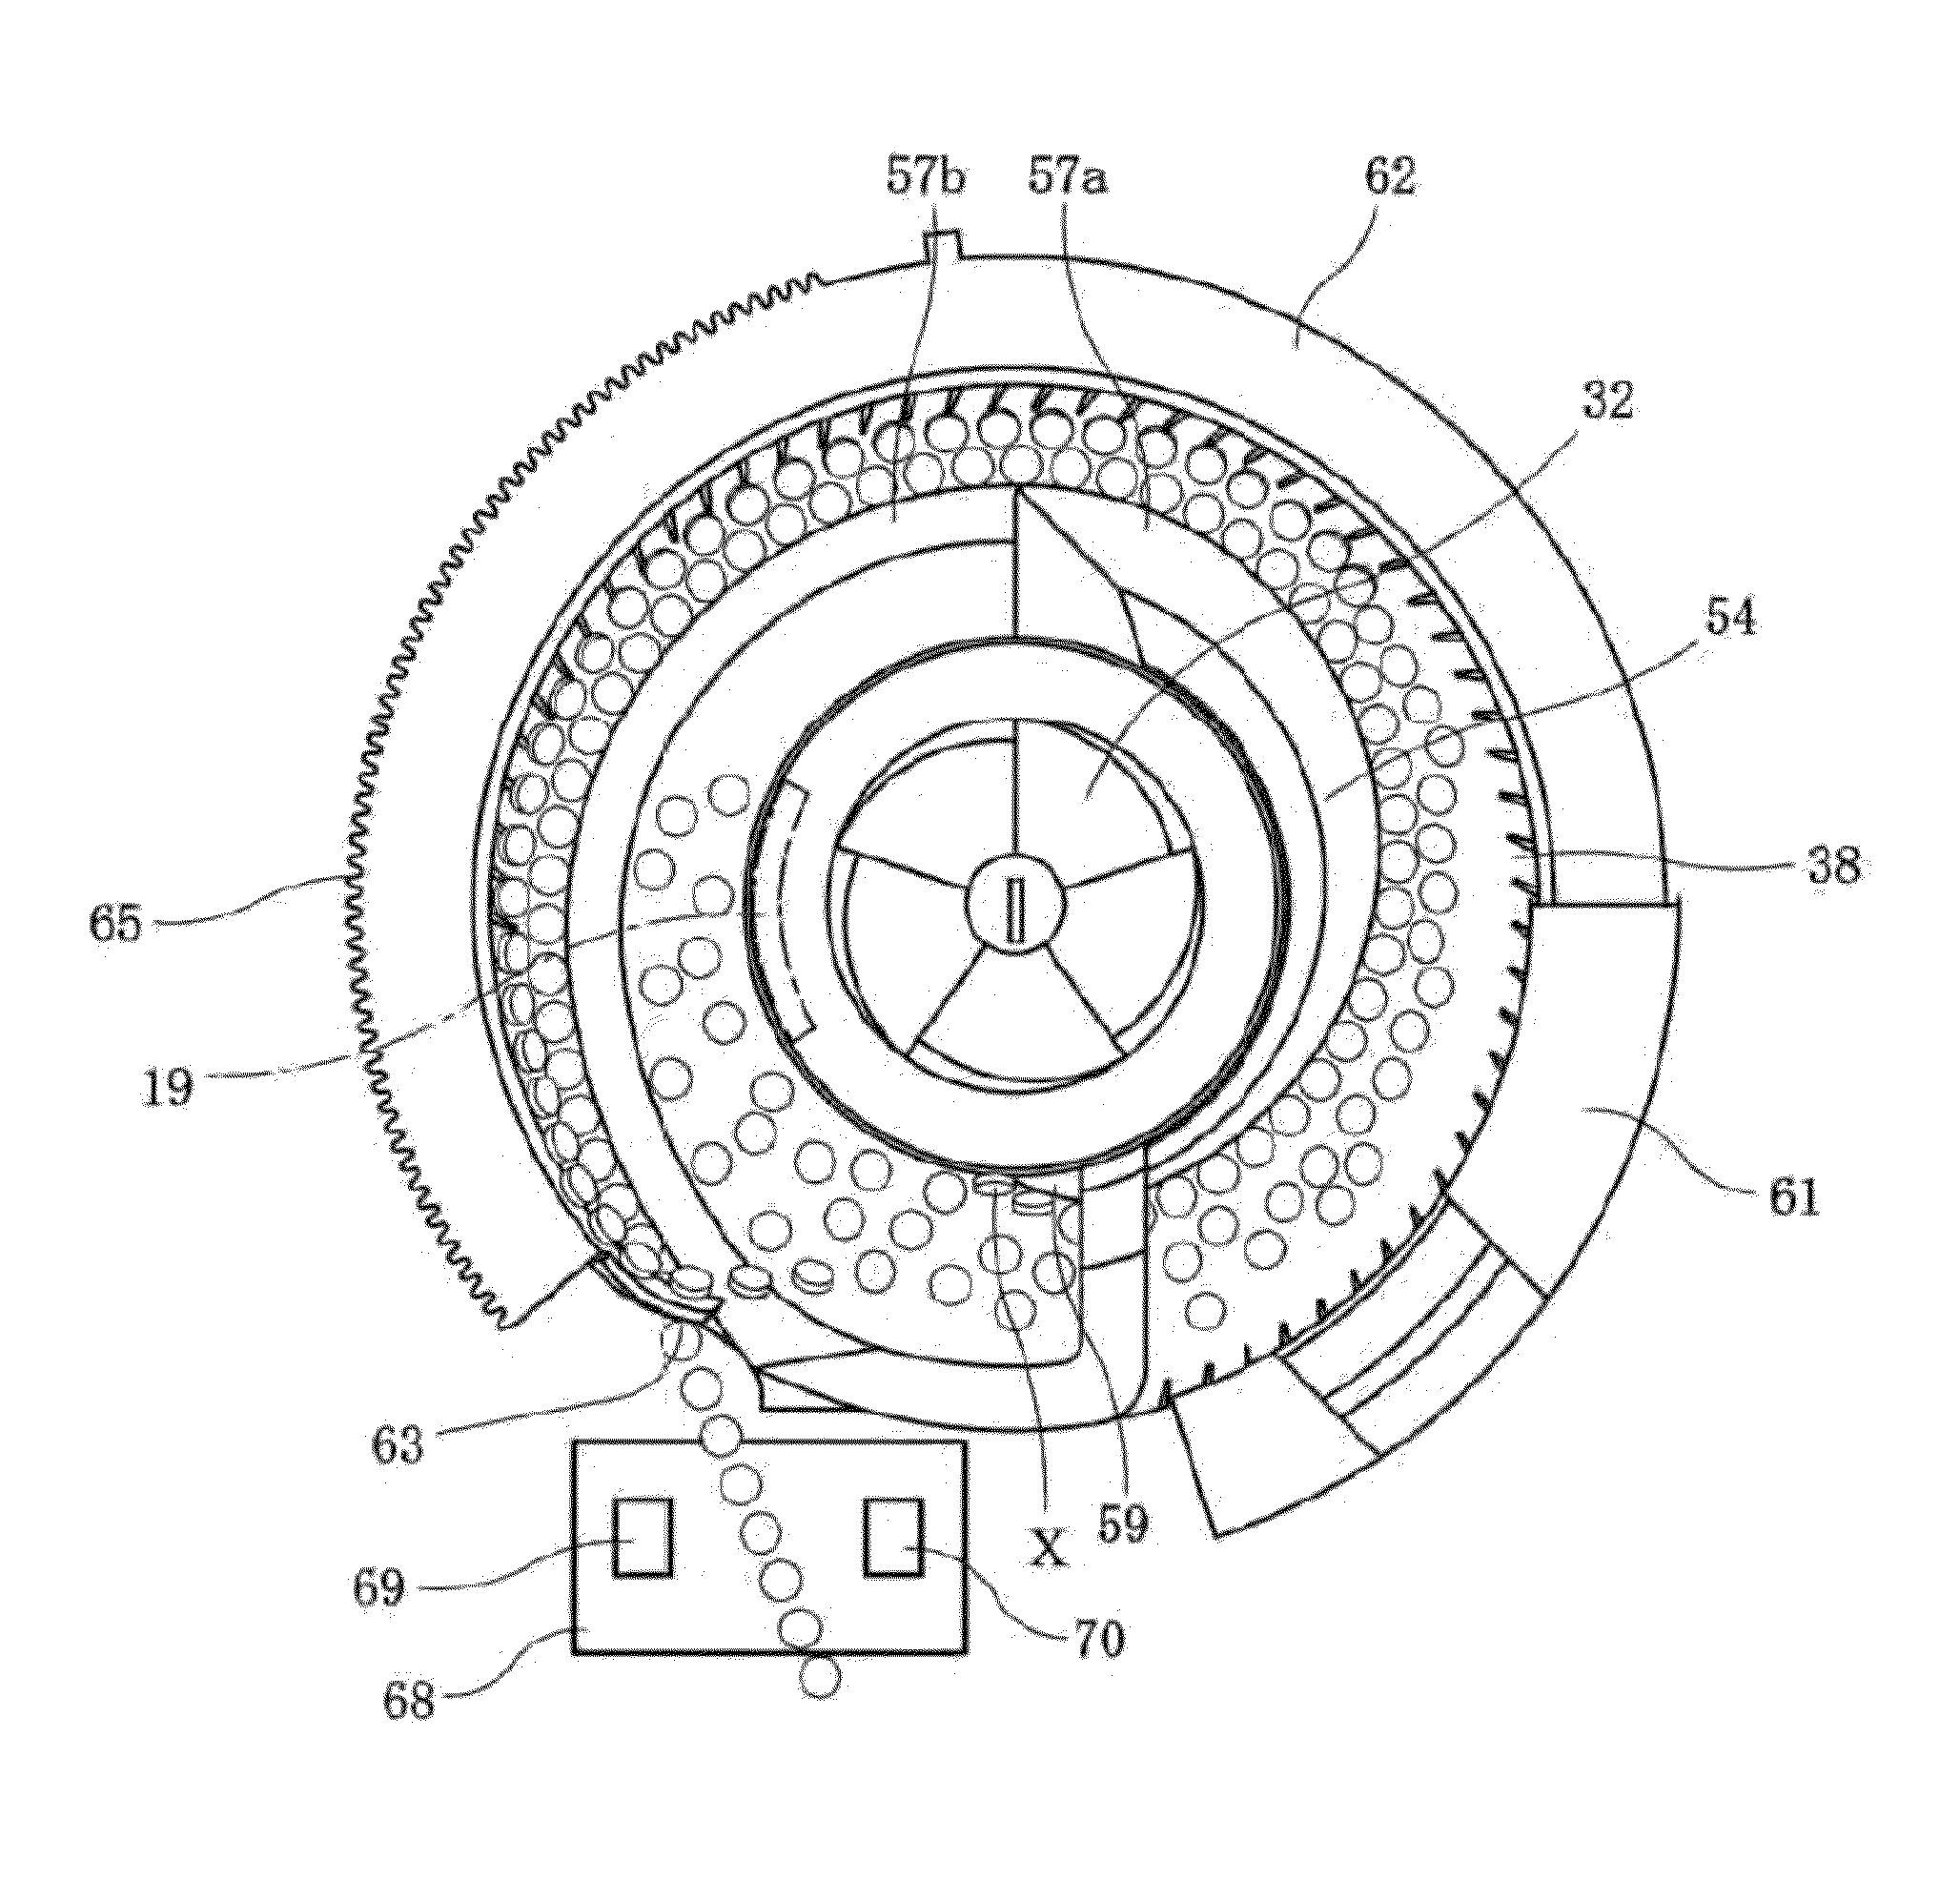 Medicine feeding device, and medicine counting device